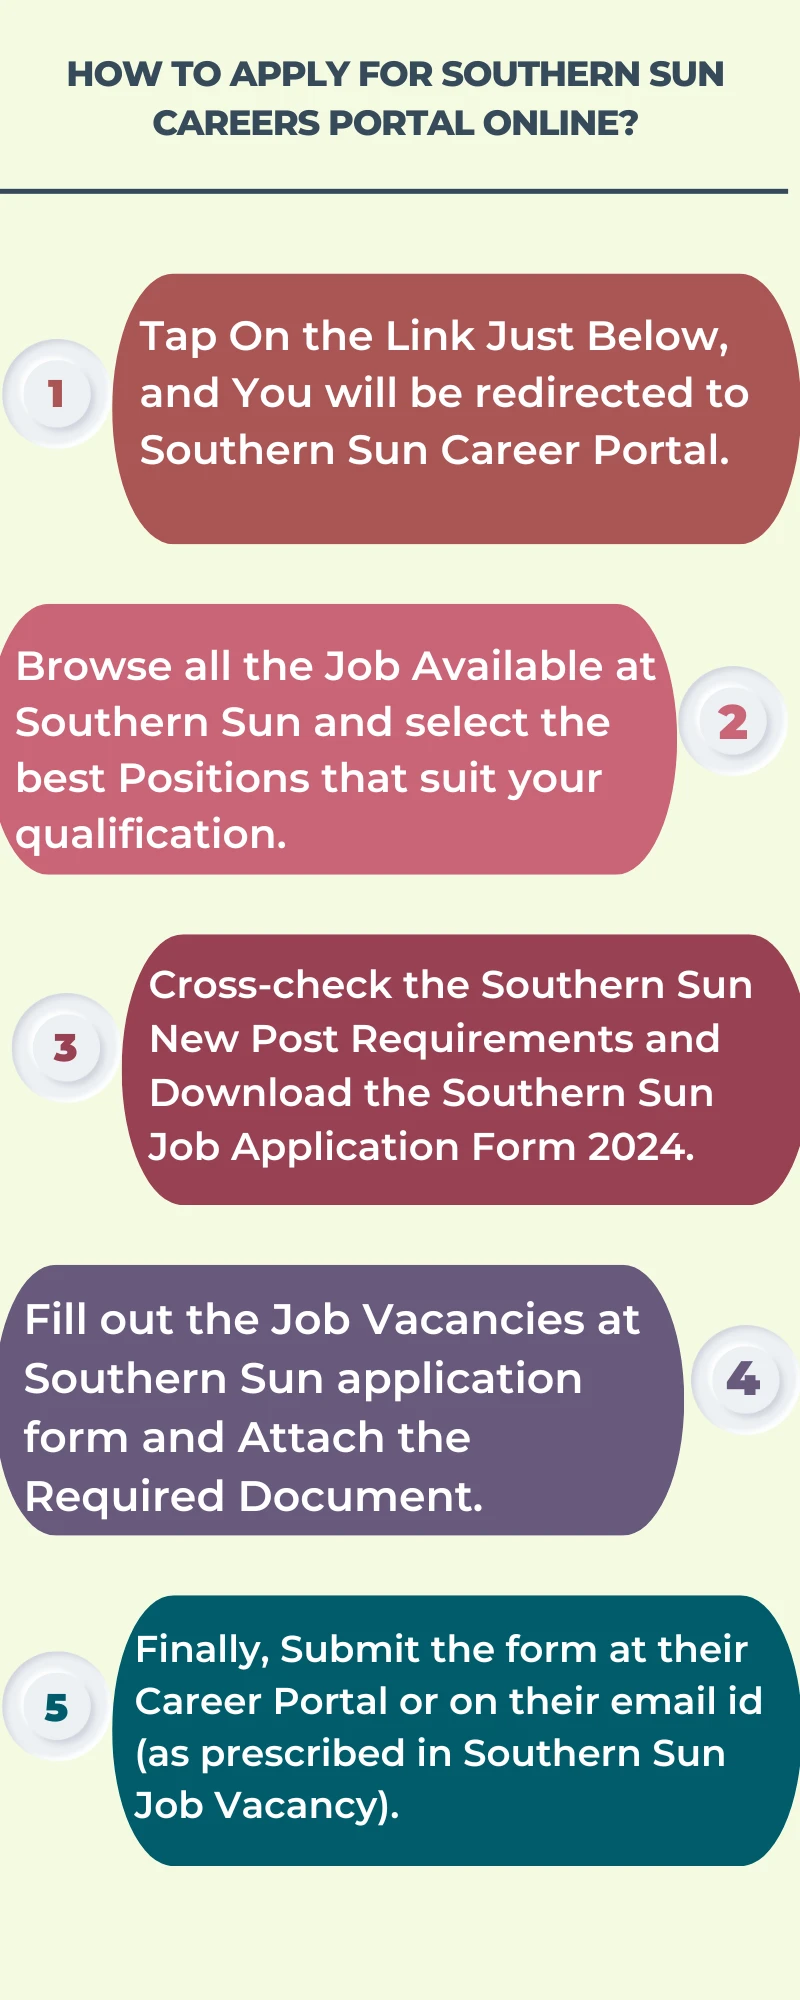 How To Apply for Southern Sun Careers Portal Online?